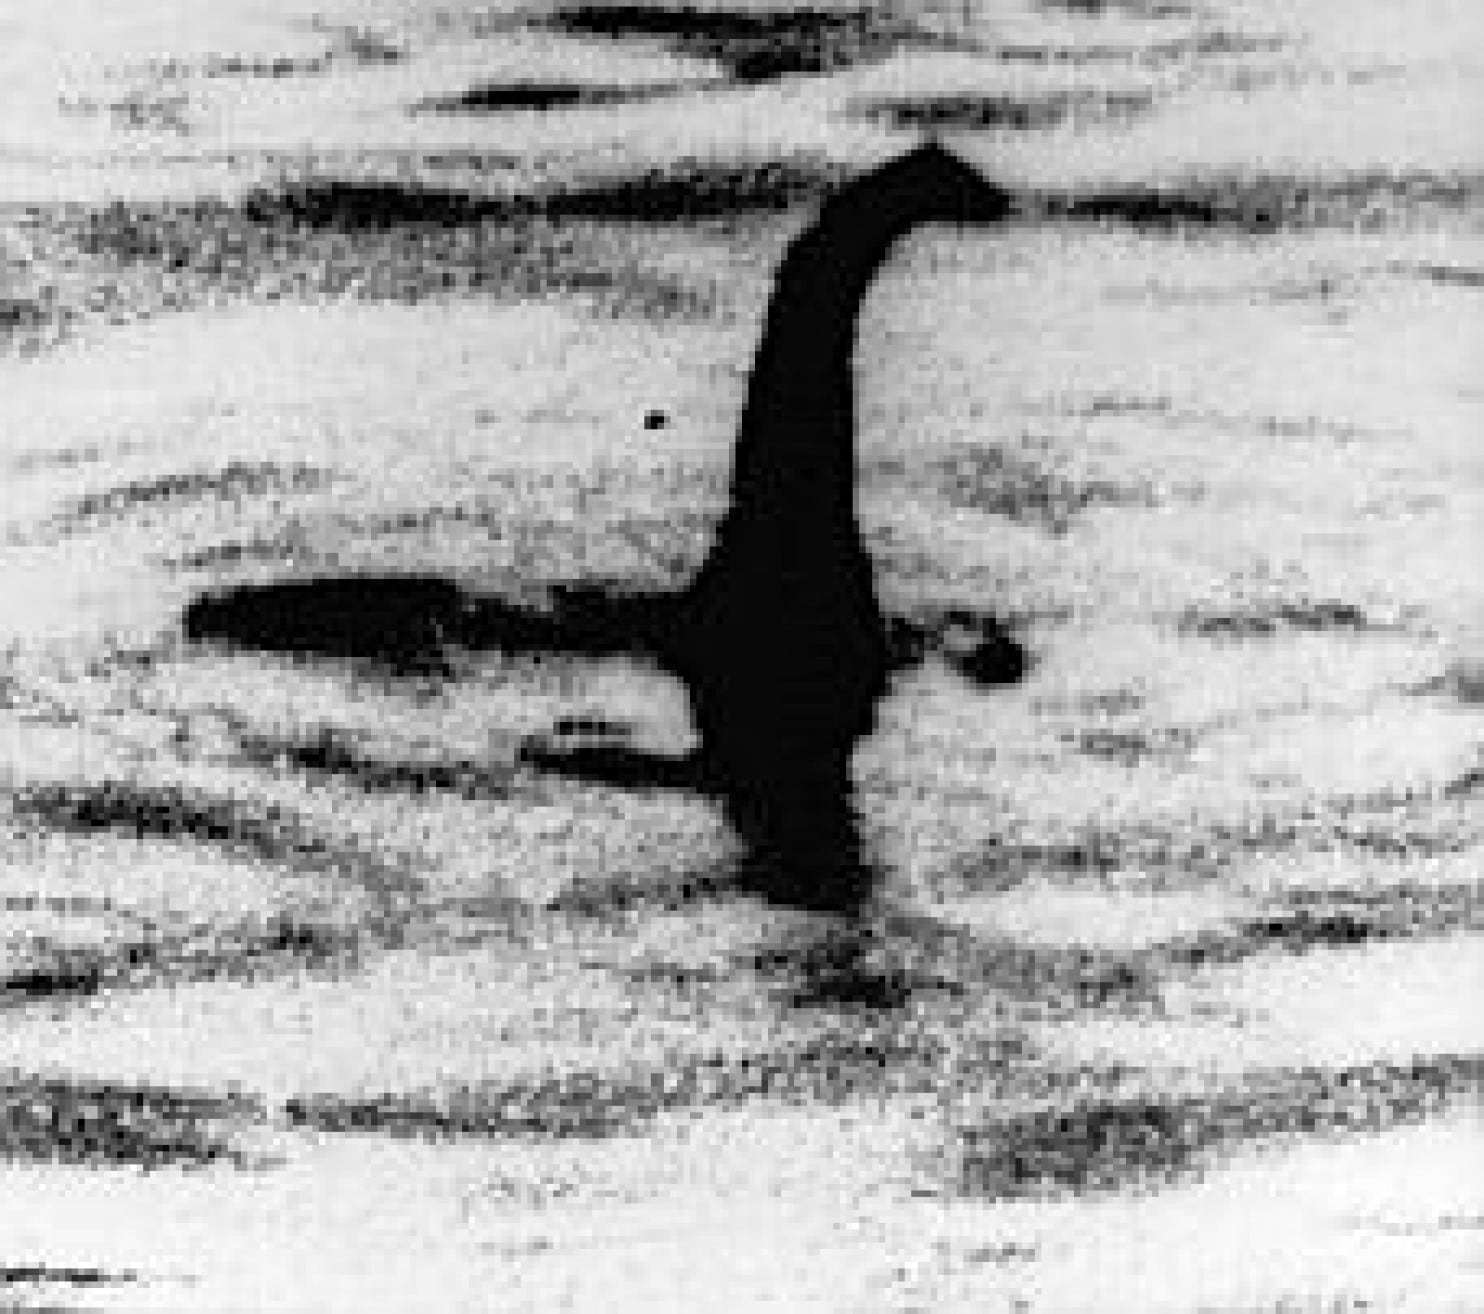 Loch Ness Monster real in biology textbook Washington Post